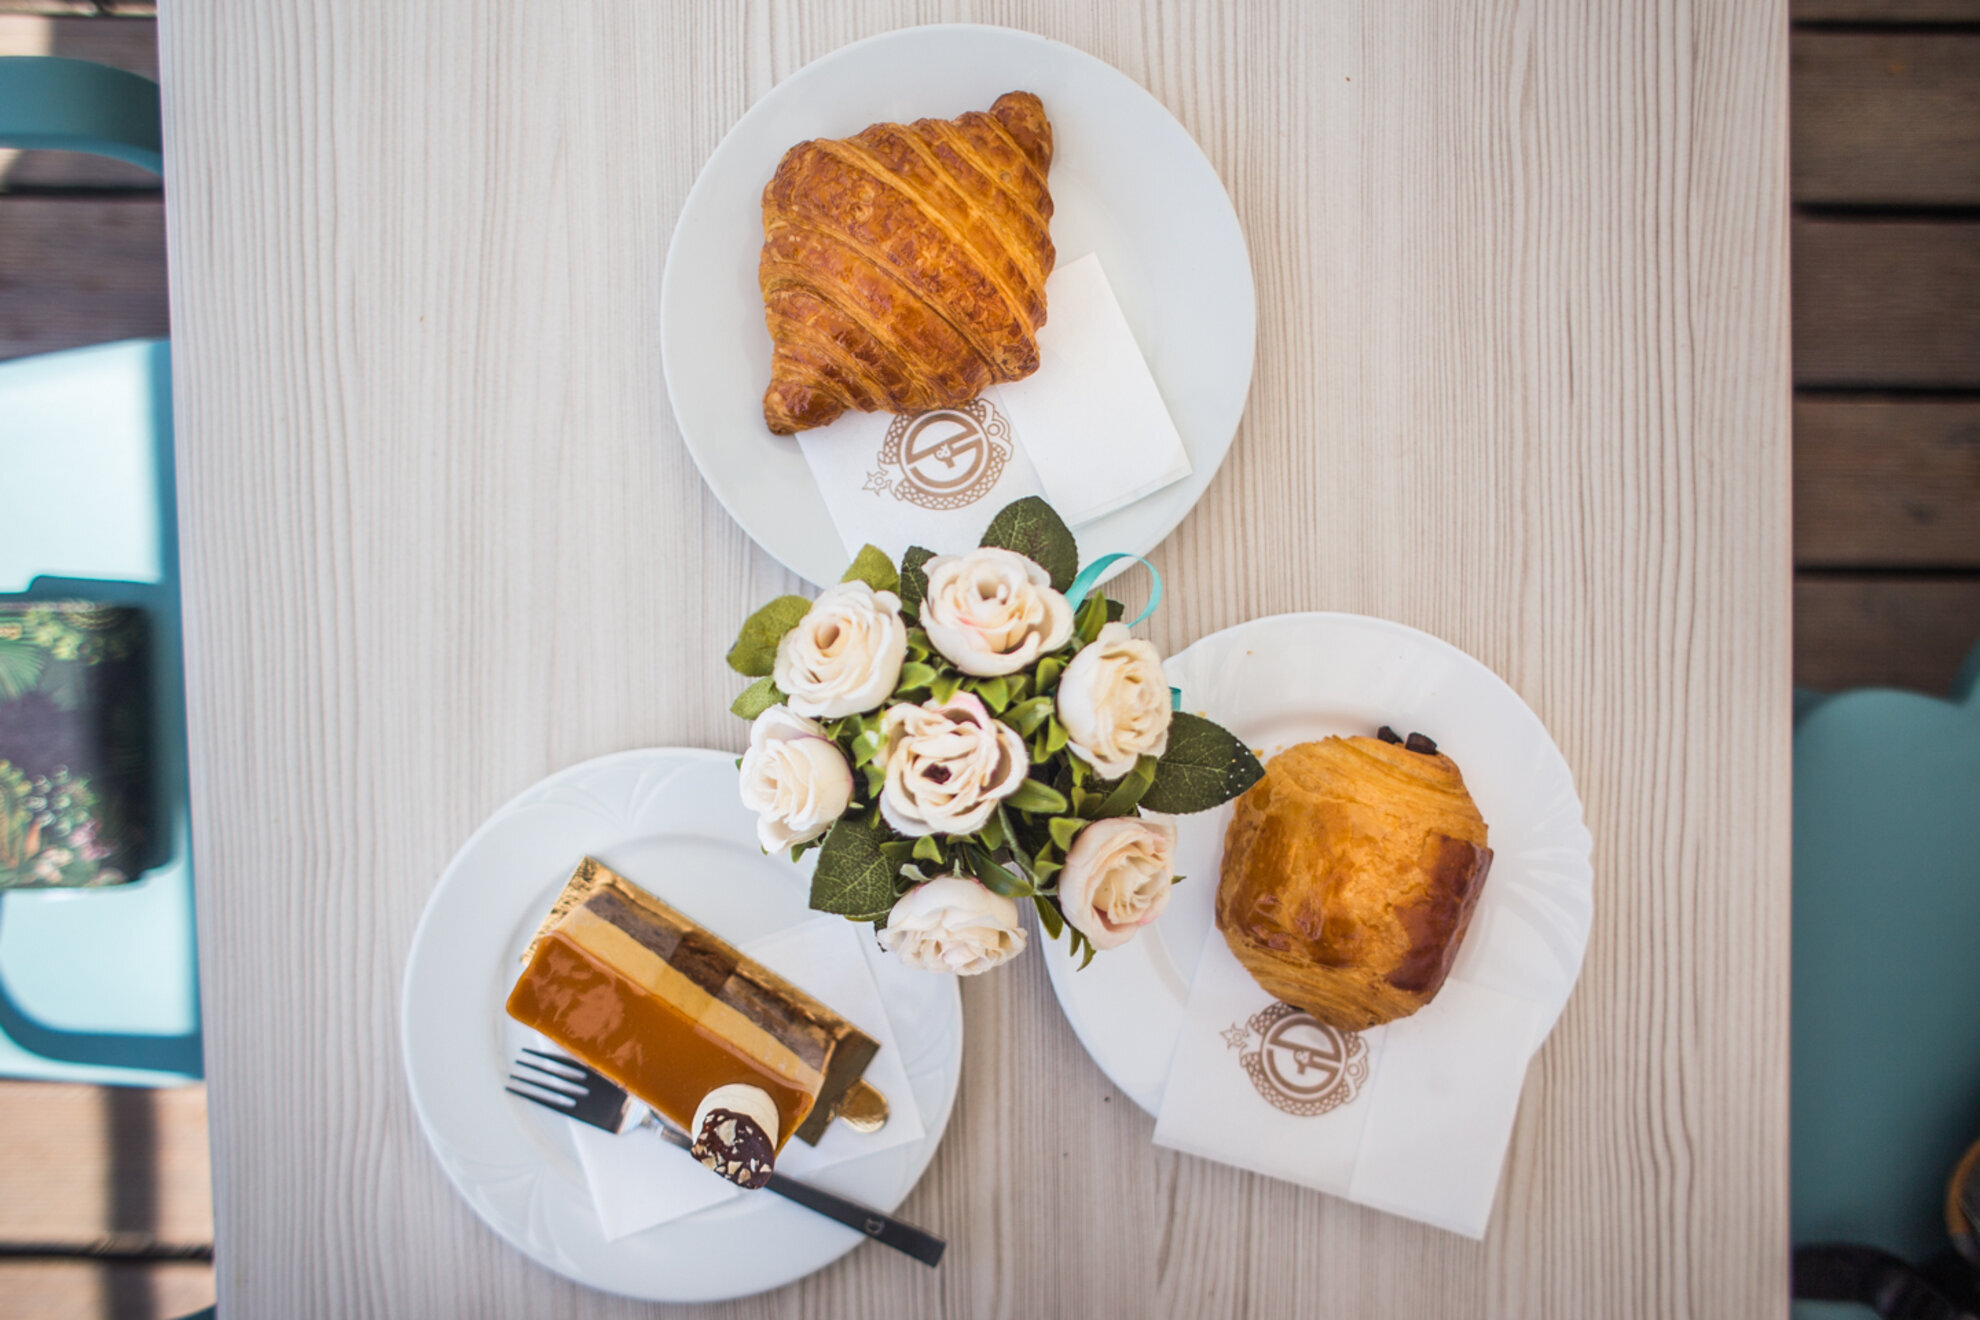 Taste heavenly croissants at G&D Artisanal Confectionery and Bakery in Balatonkenese